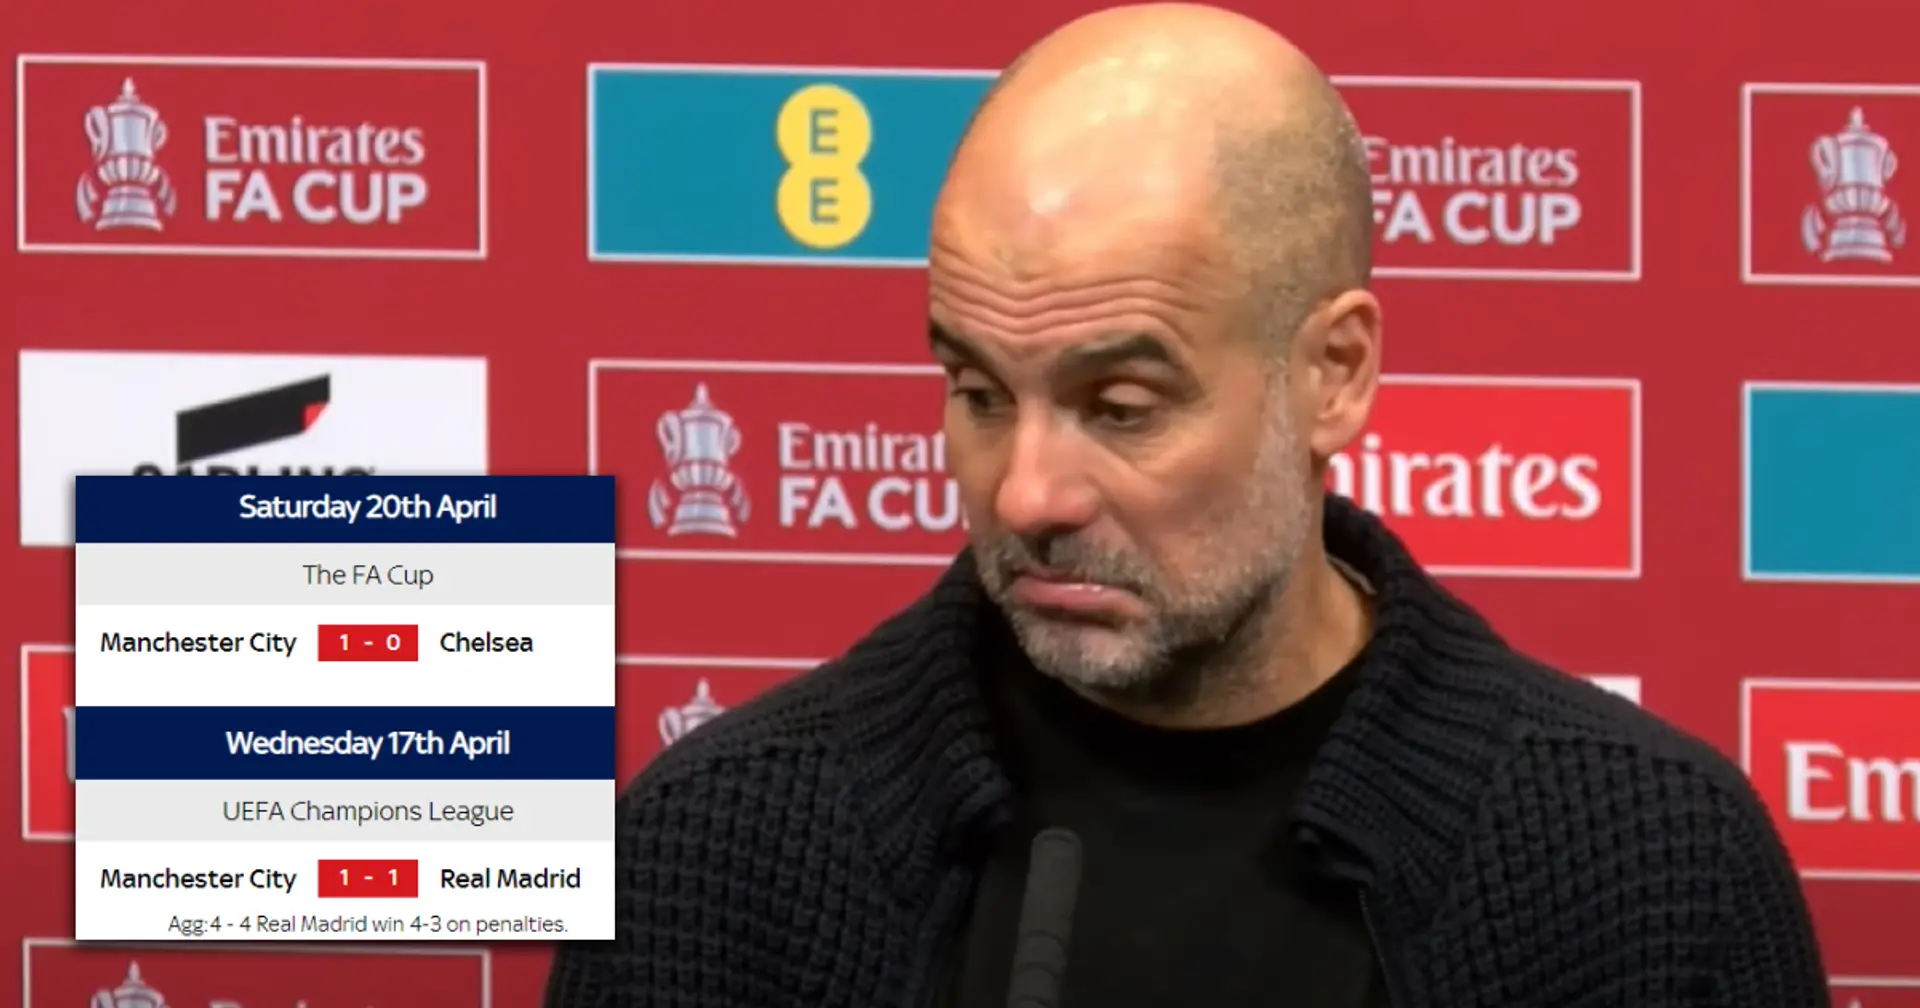 'Don't ask me to do extra things after the game': Pep Guardiola warns broadcasters after Chelsea game 